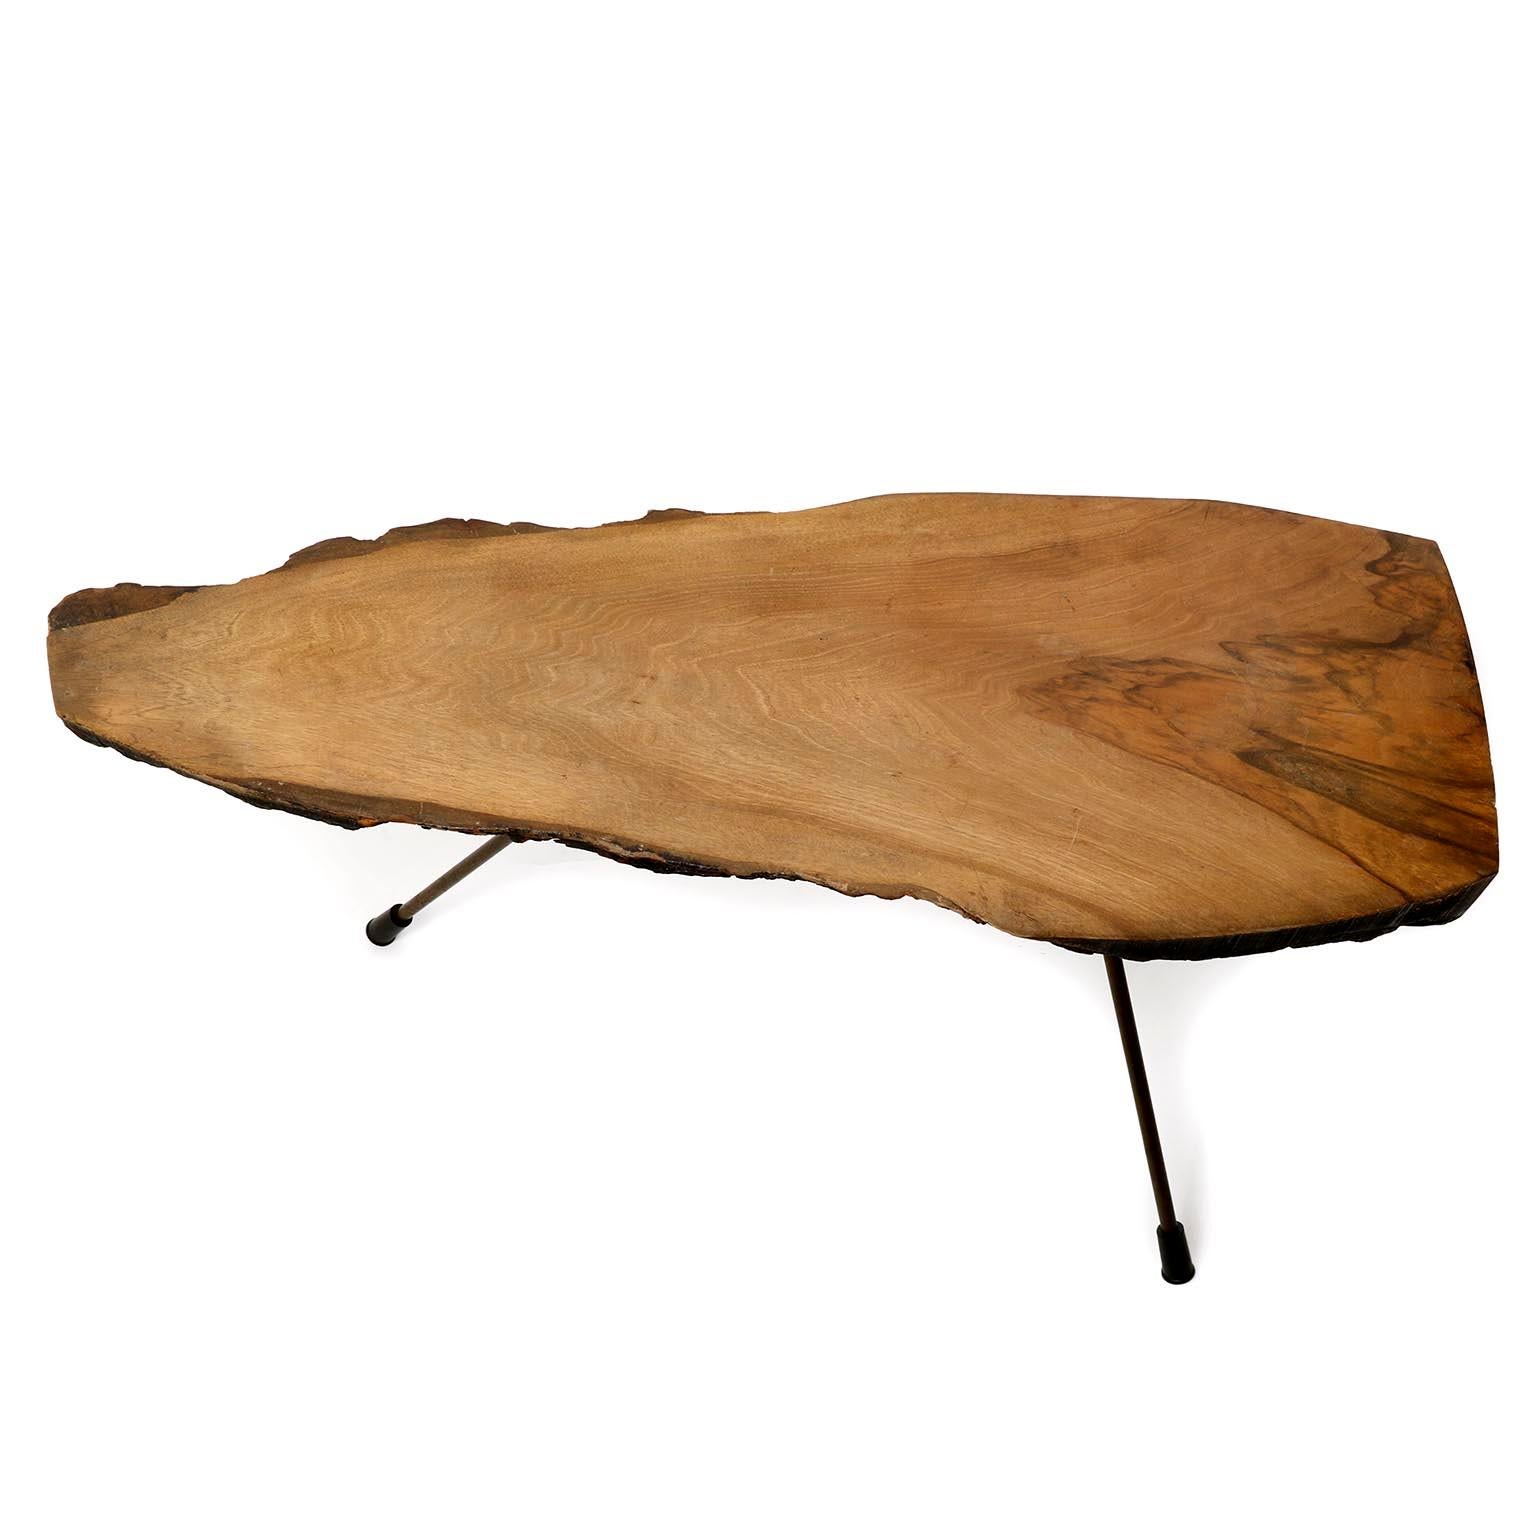 Mid-Century Modern Organic Tree Trunk Coffee Table, Carl Auböck, Walnut Wood Patinated Brass, 1950s For Sale